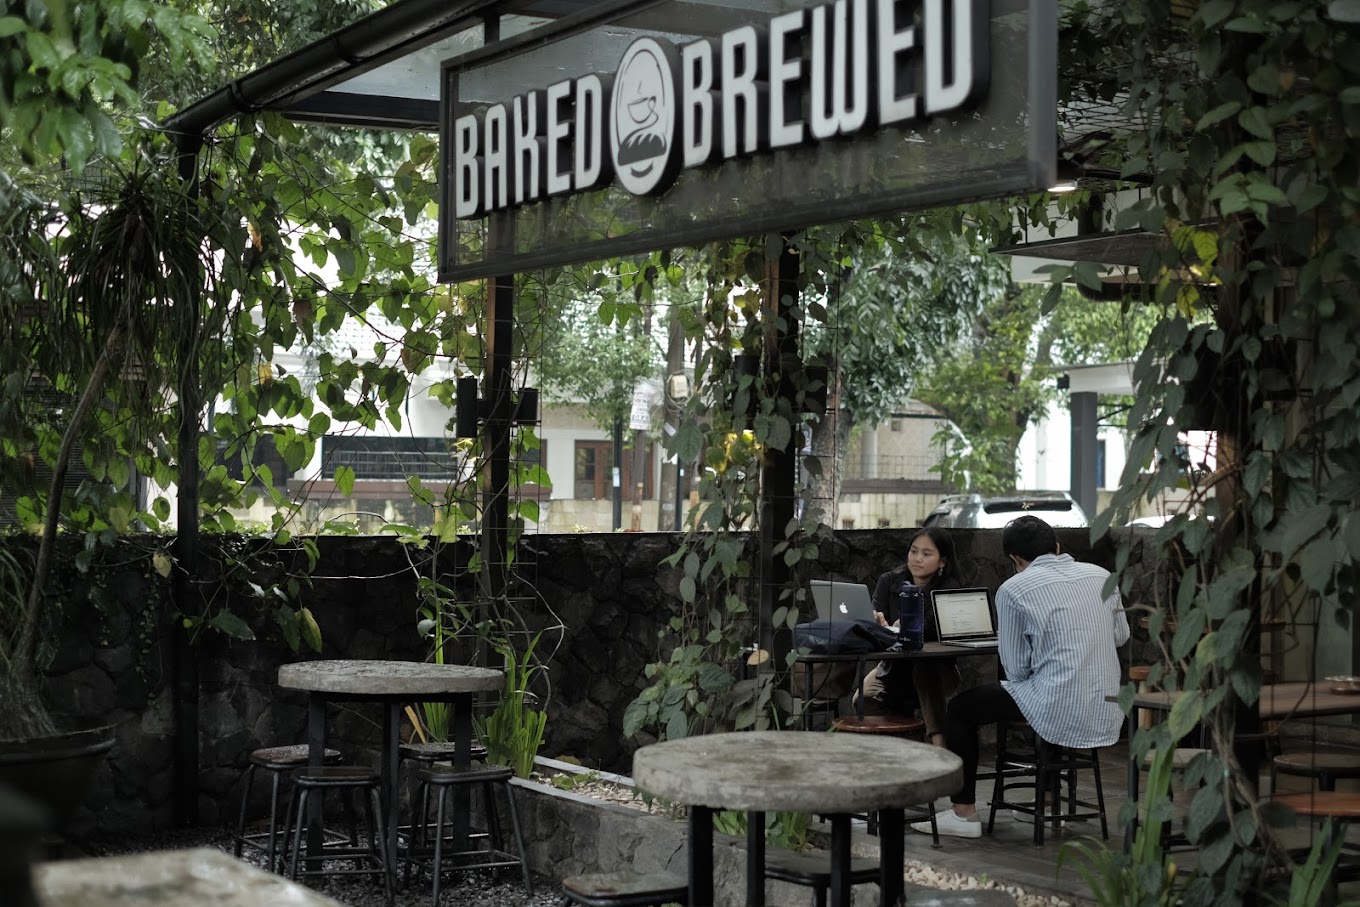 Cafe di Bogor, Baked & Brewed Coffee and Kitchen